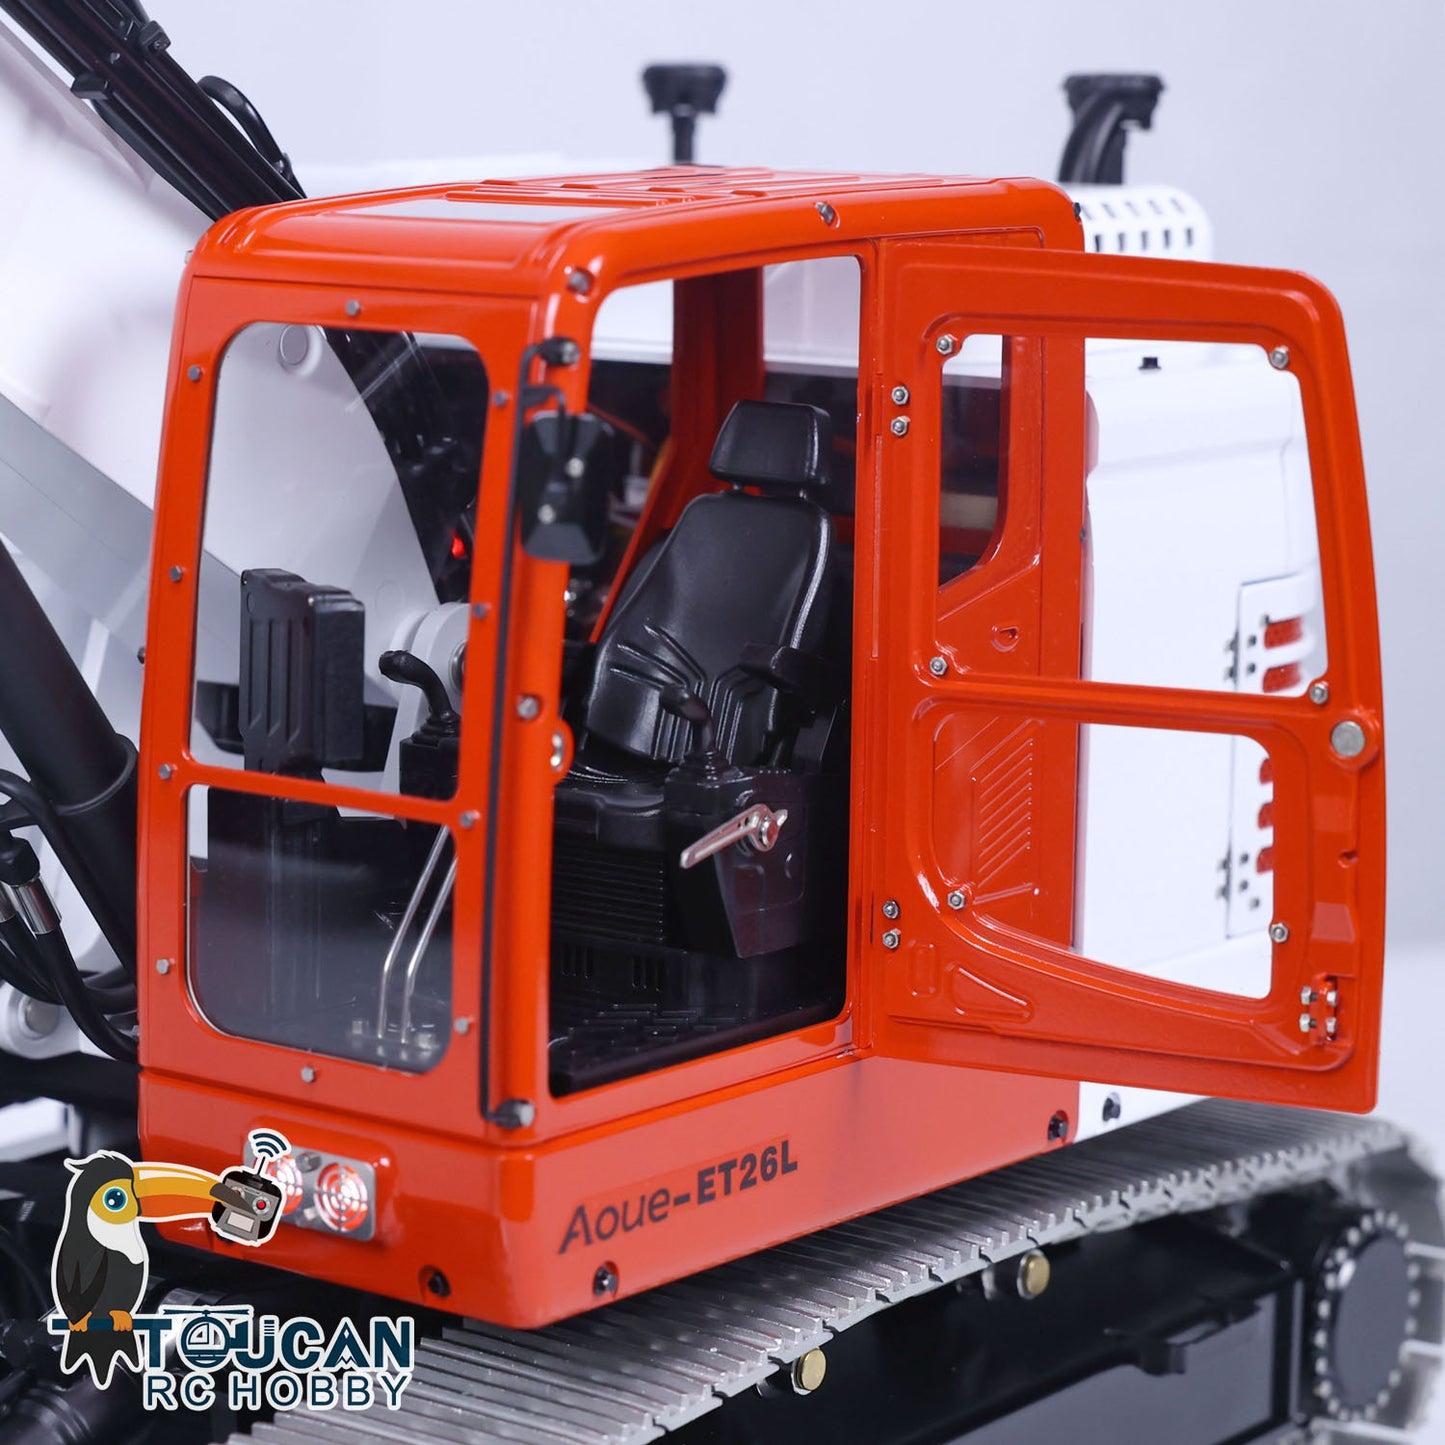 LESU Metal Aoue ET26L 1/14 Hydraulic RC Excavator Assembled Painted Radio Control Digger Hobby Model Emulated Contruction Vehicle